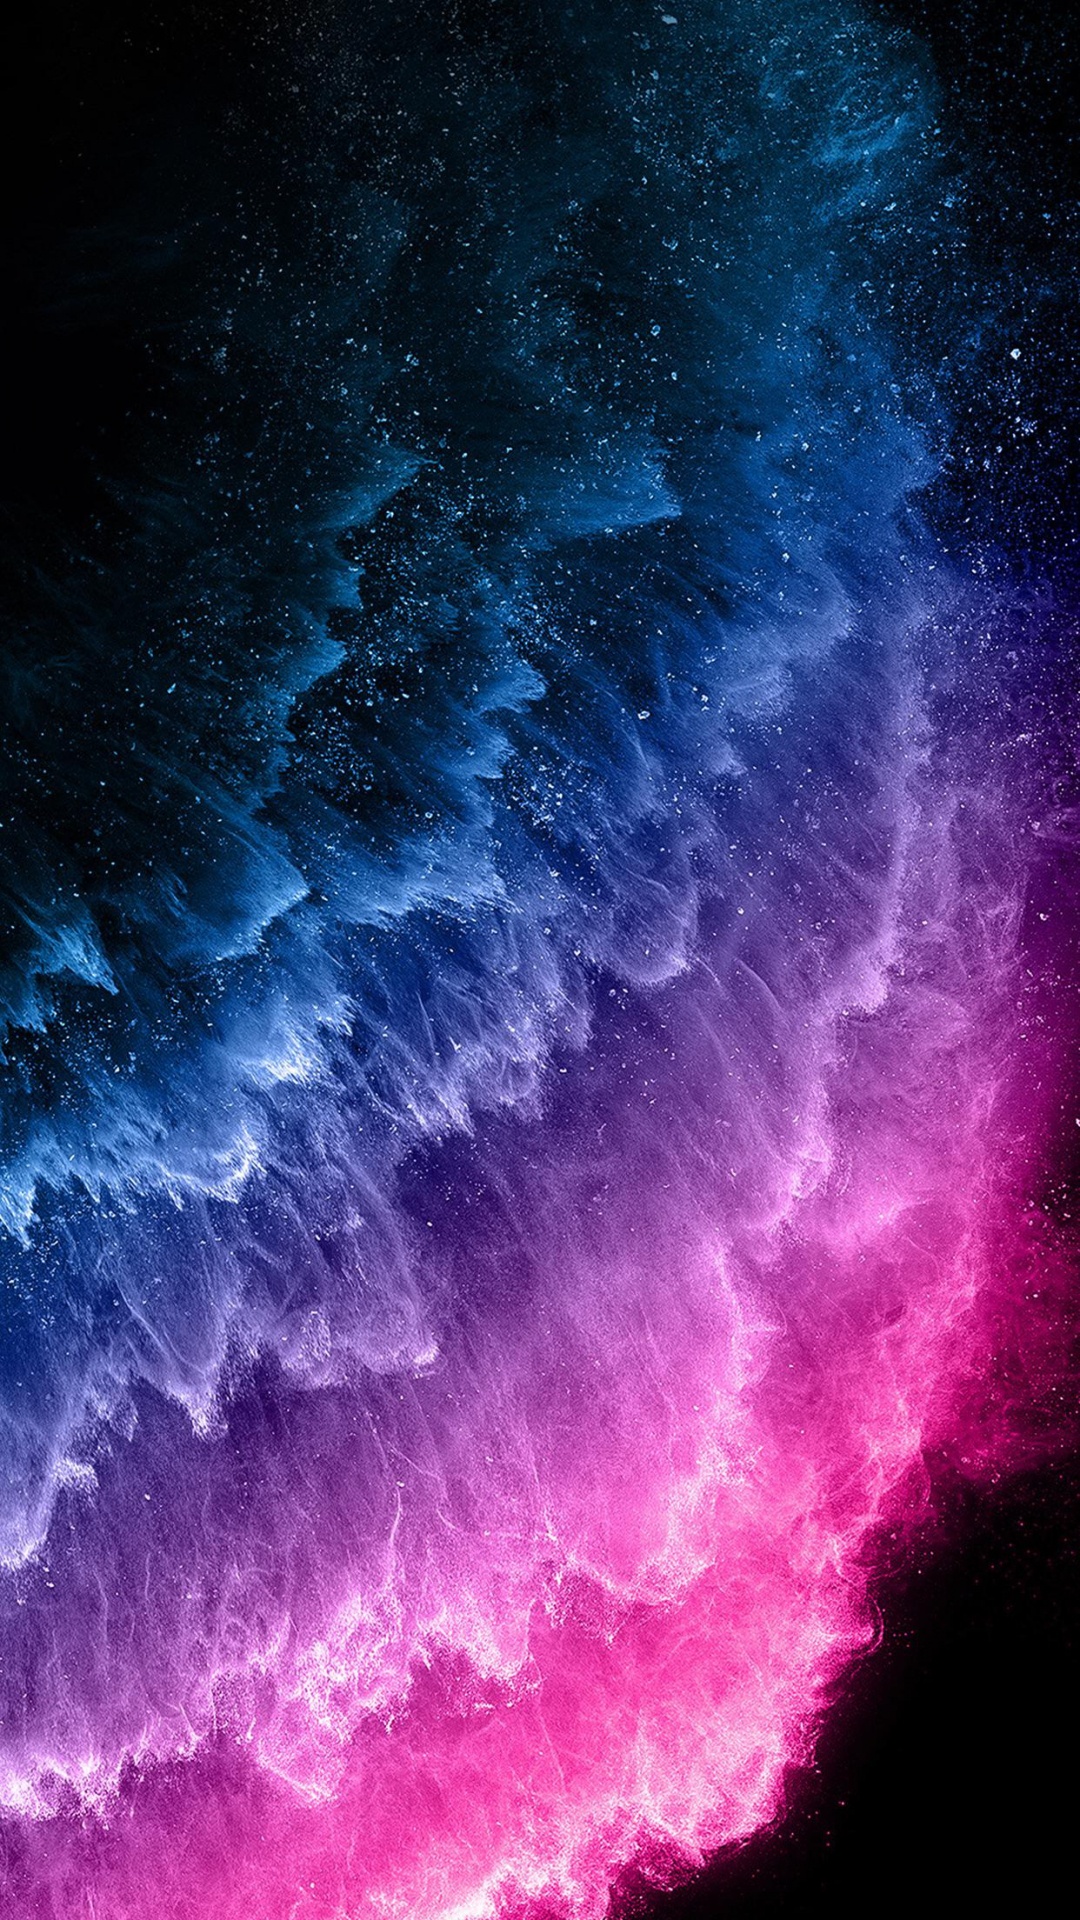 IOS 11, Apple, Android, IOS, Atmosphère. Wallpaper in 1080x1920 Resolution